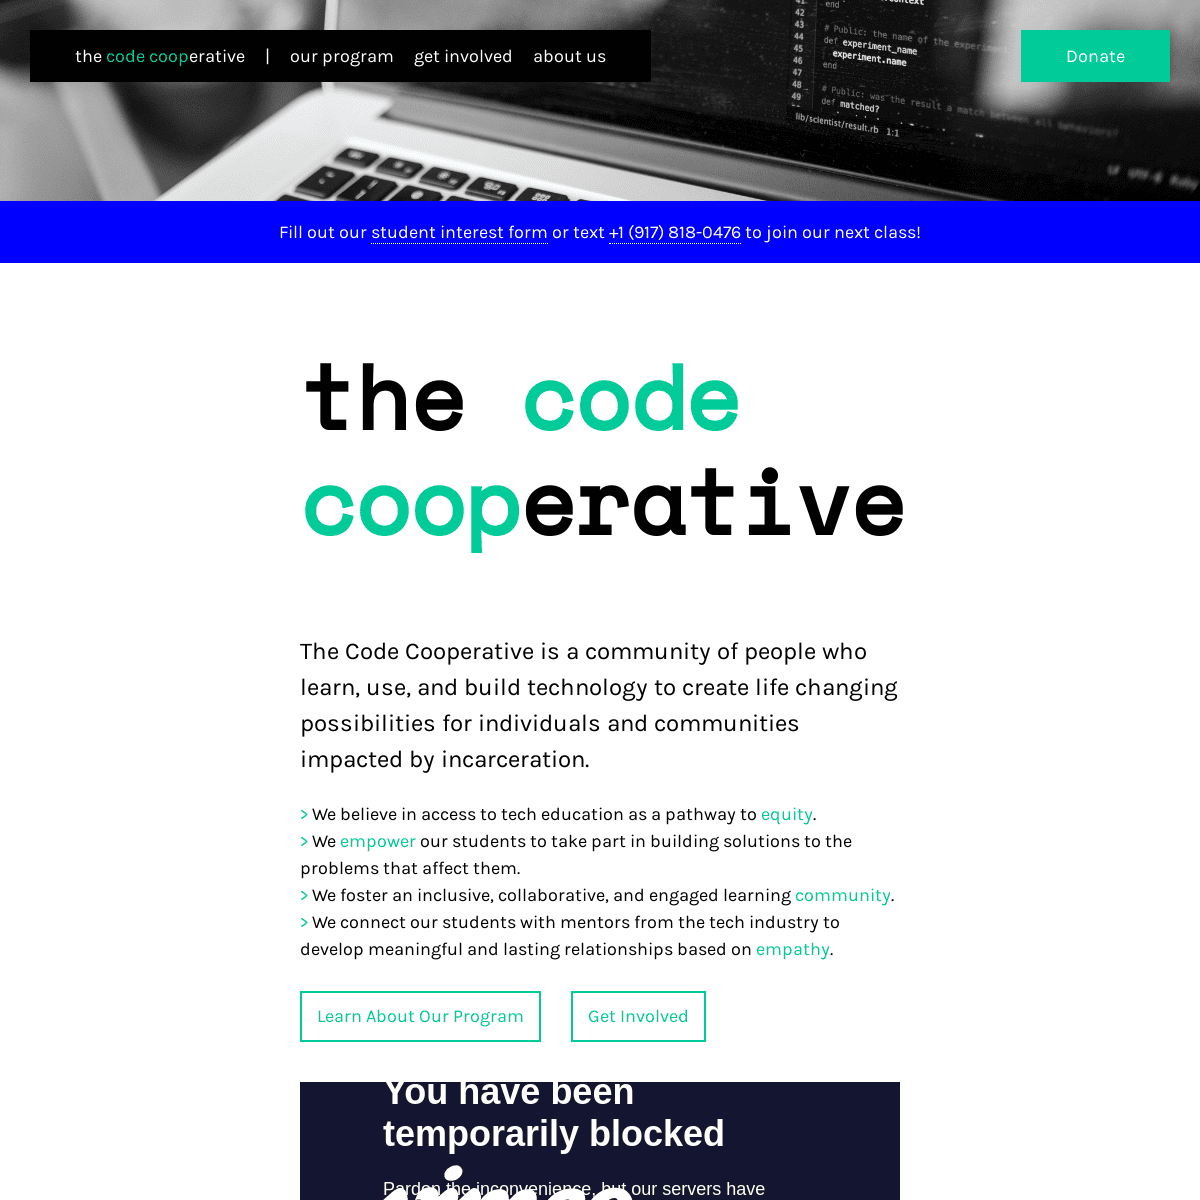 A complete backup of codecooperative.org